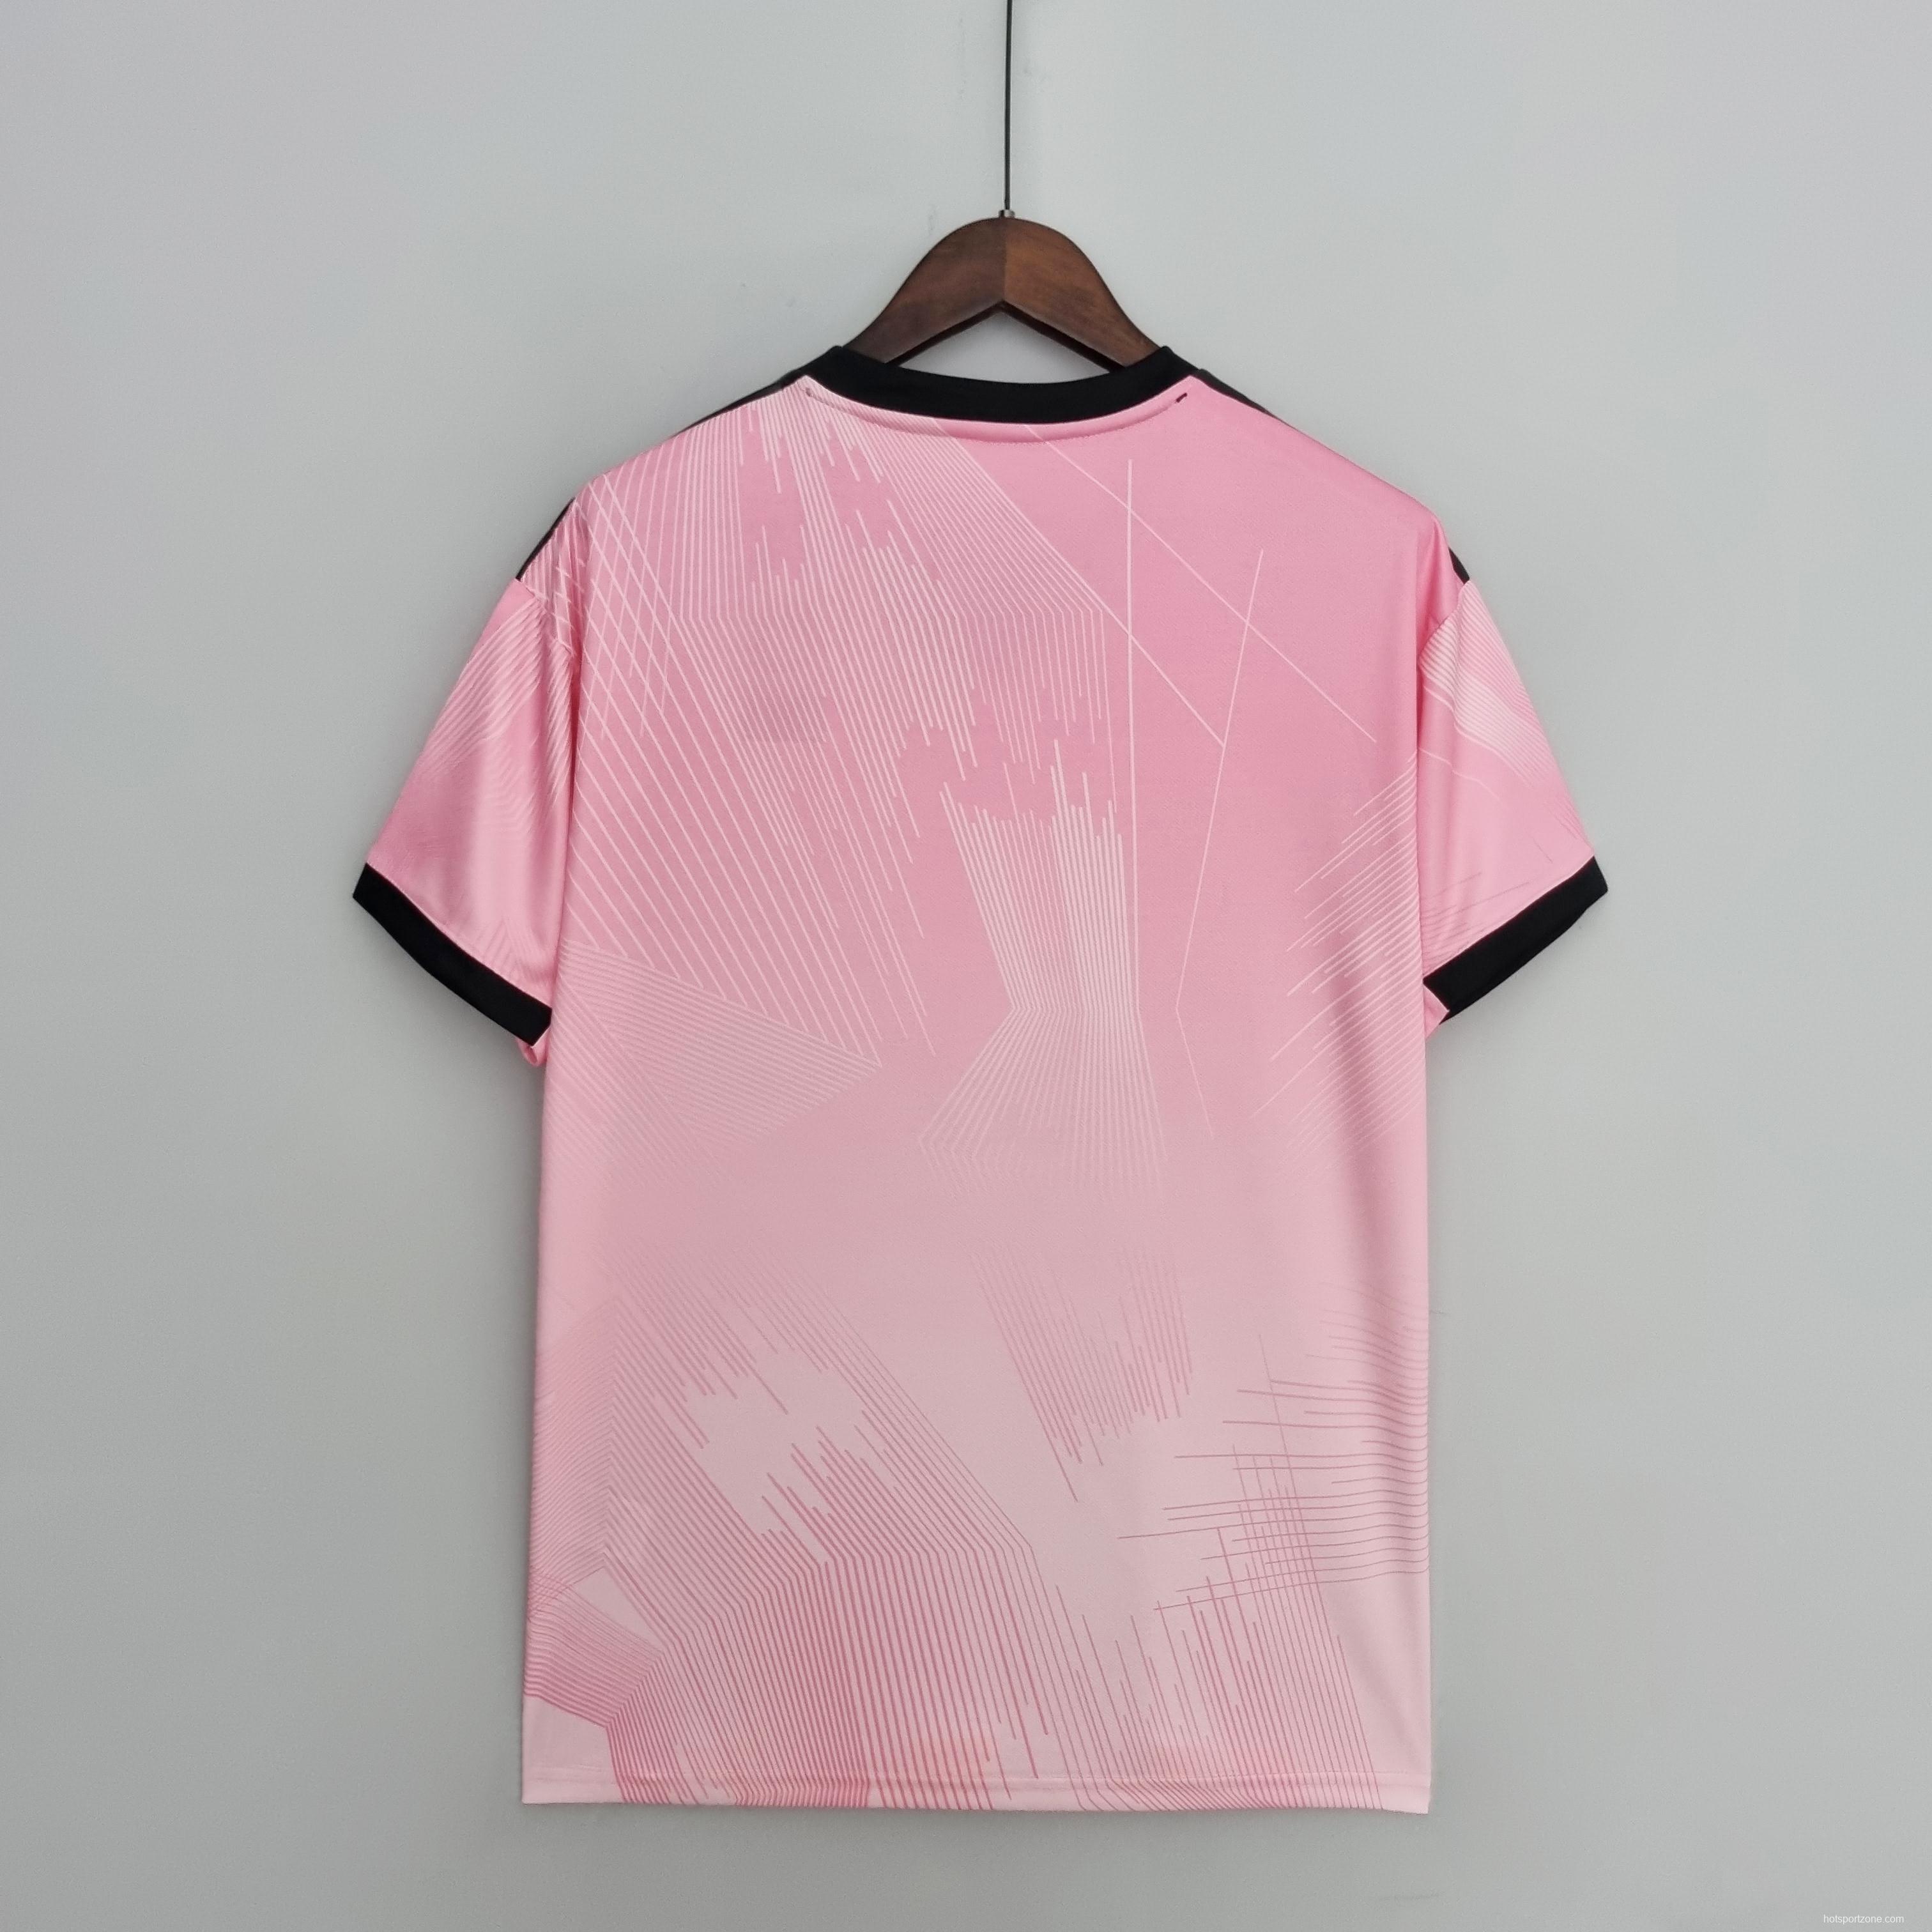 2022 Real Madrid Y3 Edition Pink Soccer Jersey